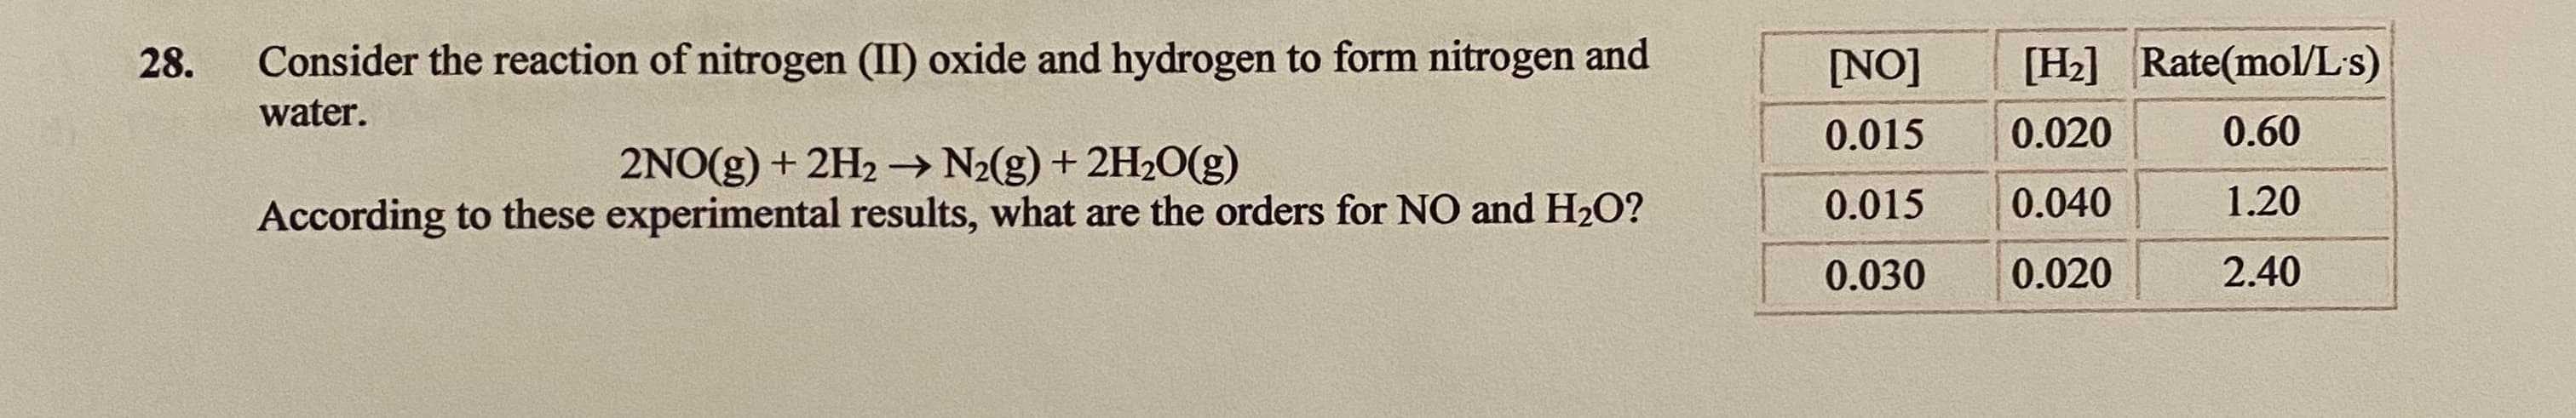 Consider the reaction of nitrogen (II) oxide and hydrogen to form nitrogen and
[NO]
[Hz] Rate(mol/Ls)
water.
0.015
0.020
0.60
2NO(g) + 2H2 –→ N2(g) + 2H2O(g)
According to these experimental results, what are the orders for NO and H2O?
0.015
0.040
1.20
0.030
0.020
2.40
